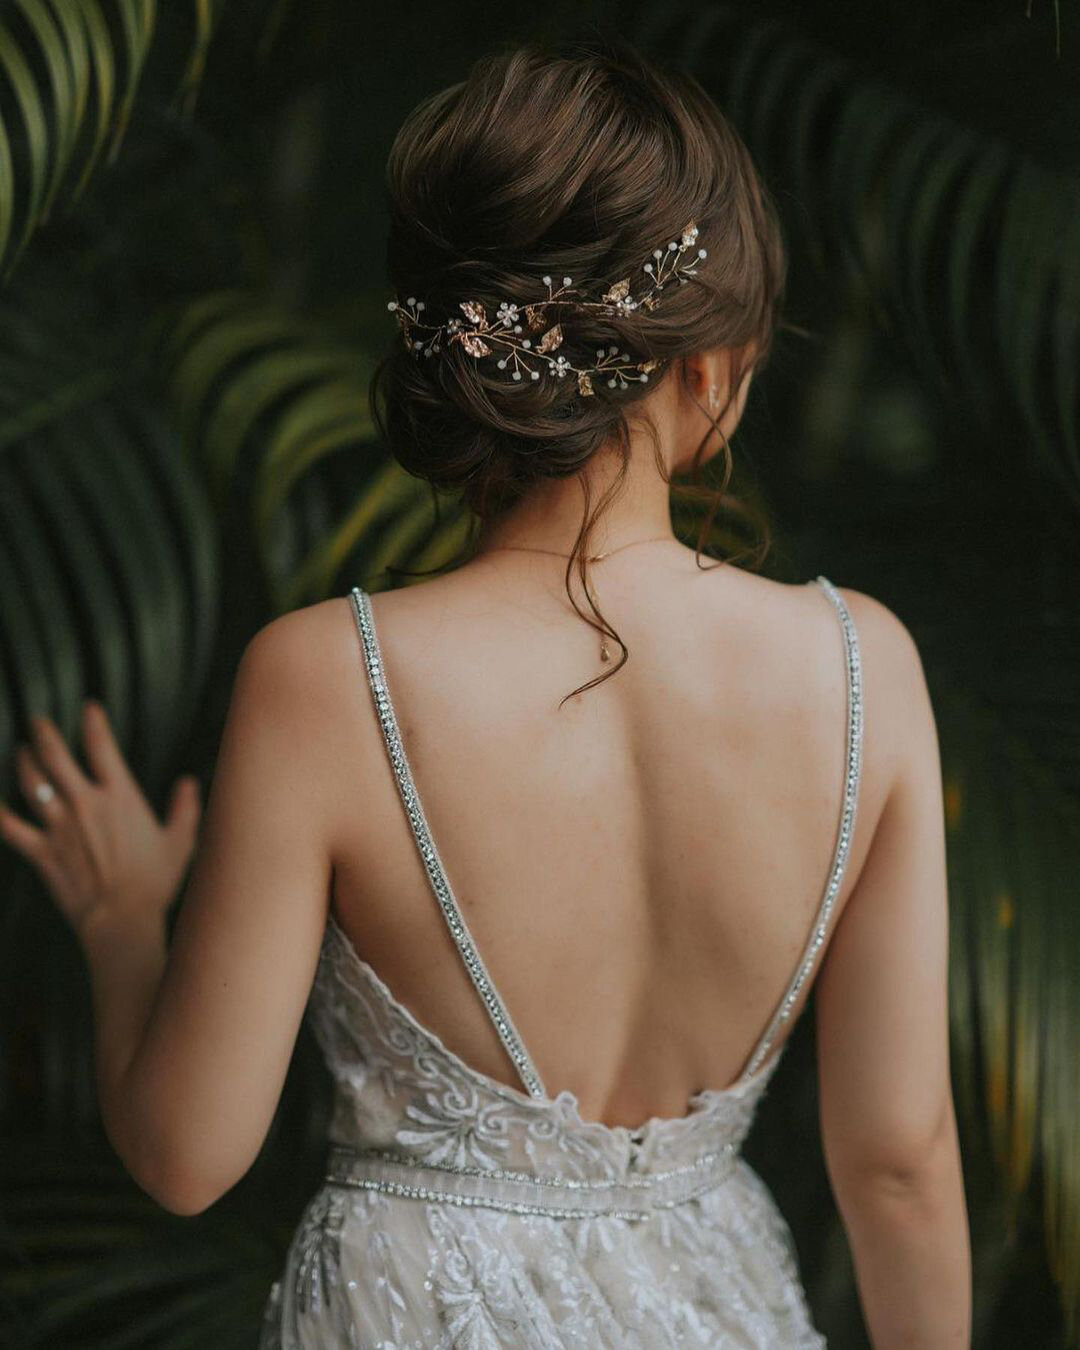 These Christina Wu Brides Wedding Dresses are #AlltheFeels ⋆ Ruffled